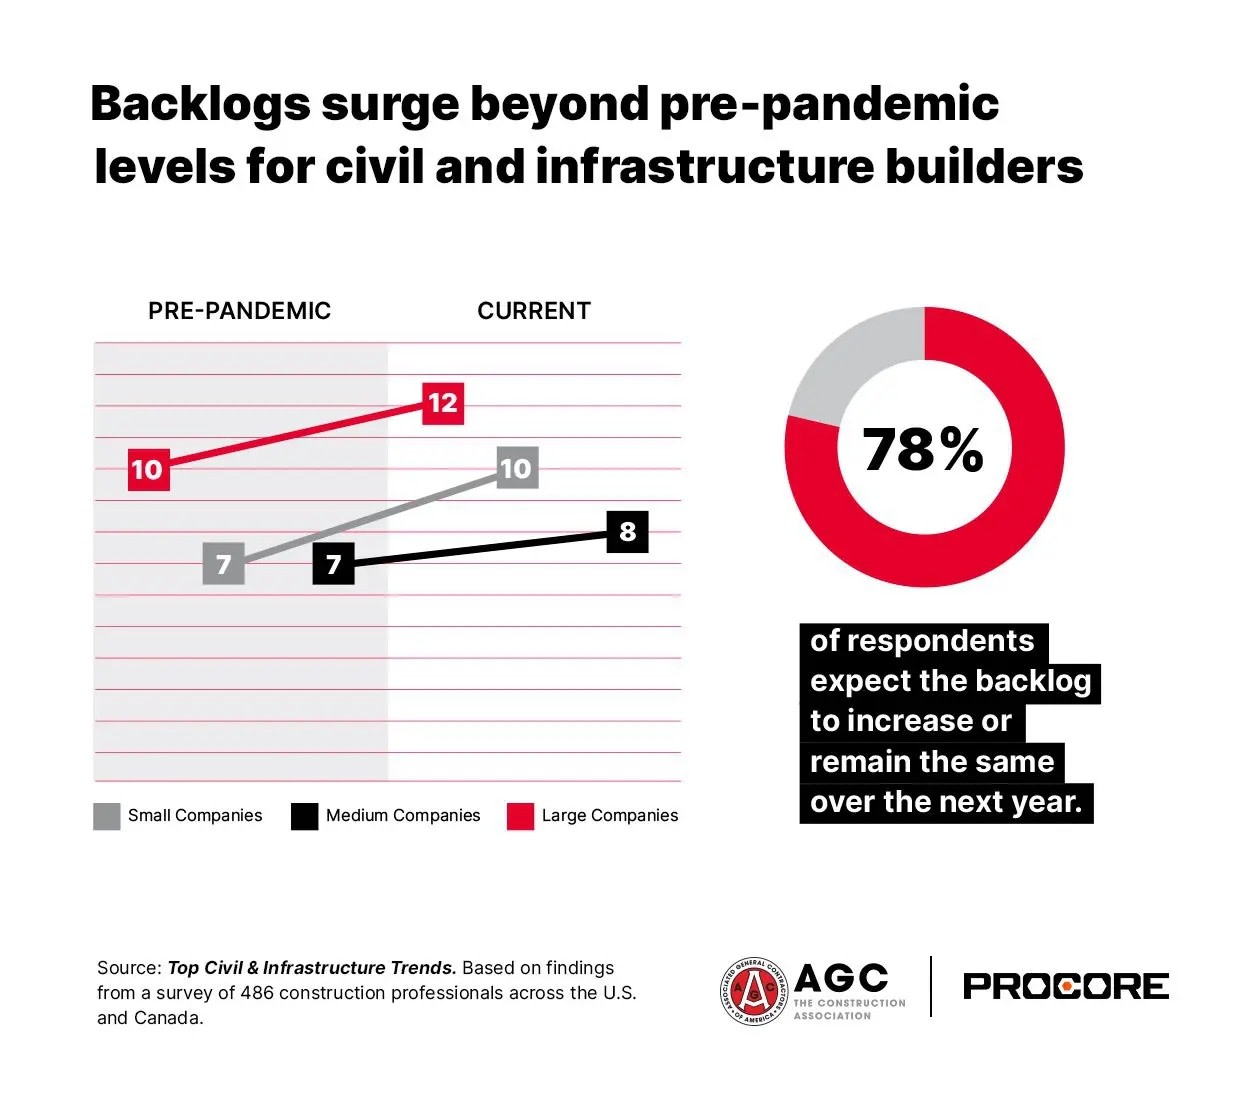 Backlogs surge beyond pre-pandemic levels for civil and infrastructure builders stats